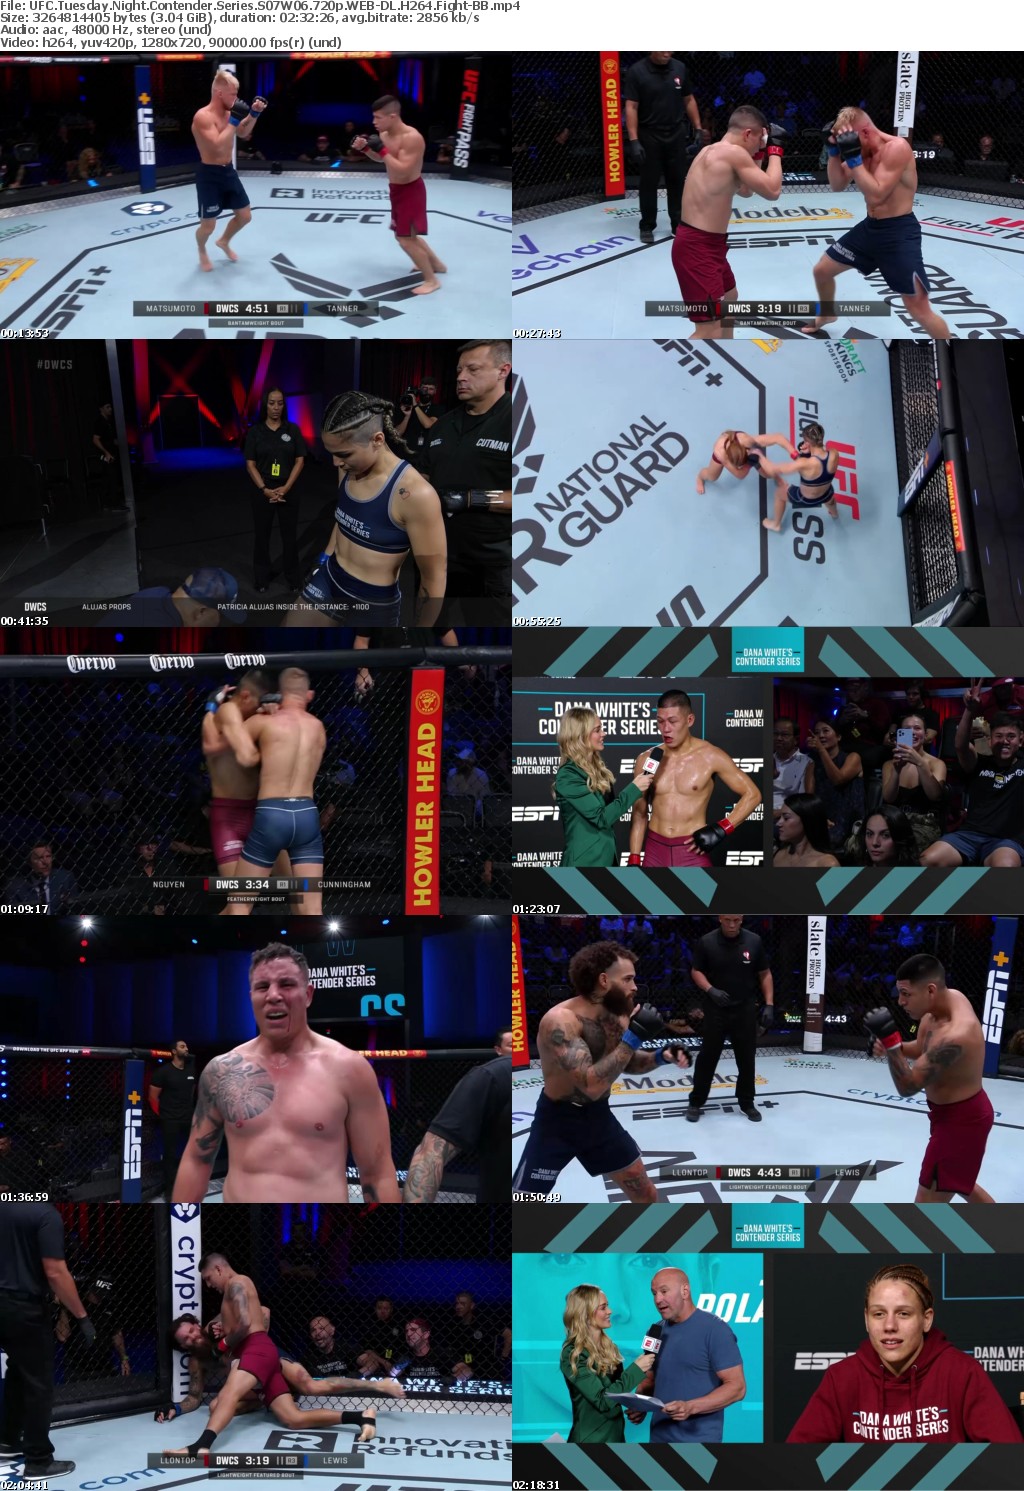 UFC Tuesday Night Contender Series S07W06 720p WEB-DL H264 Fight-BB